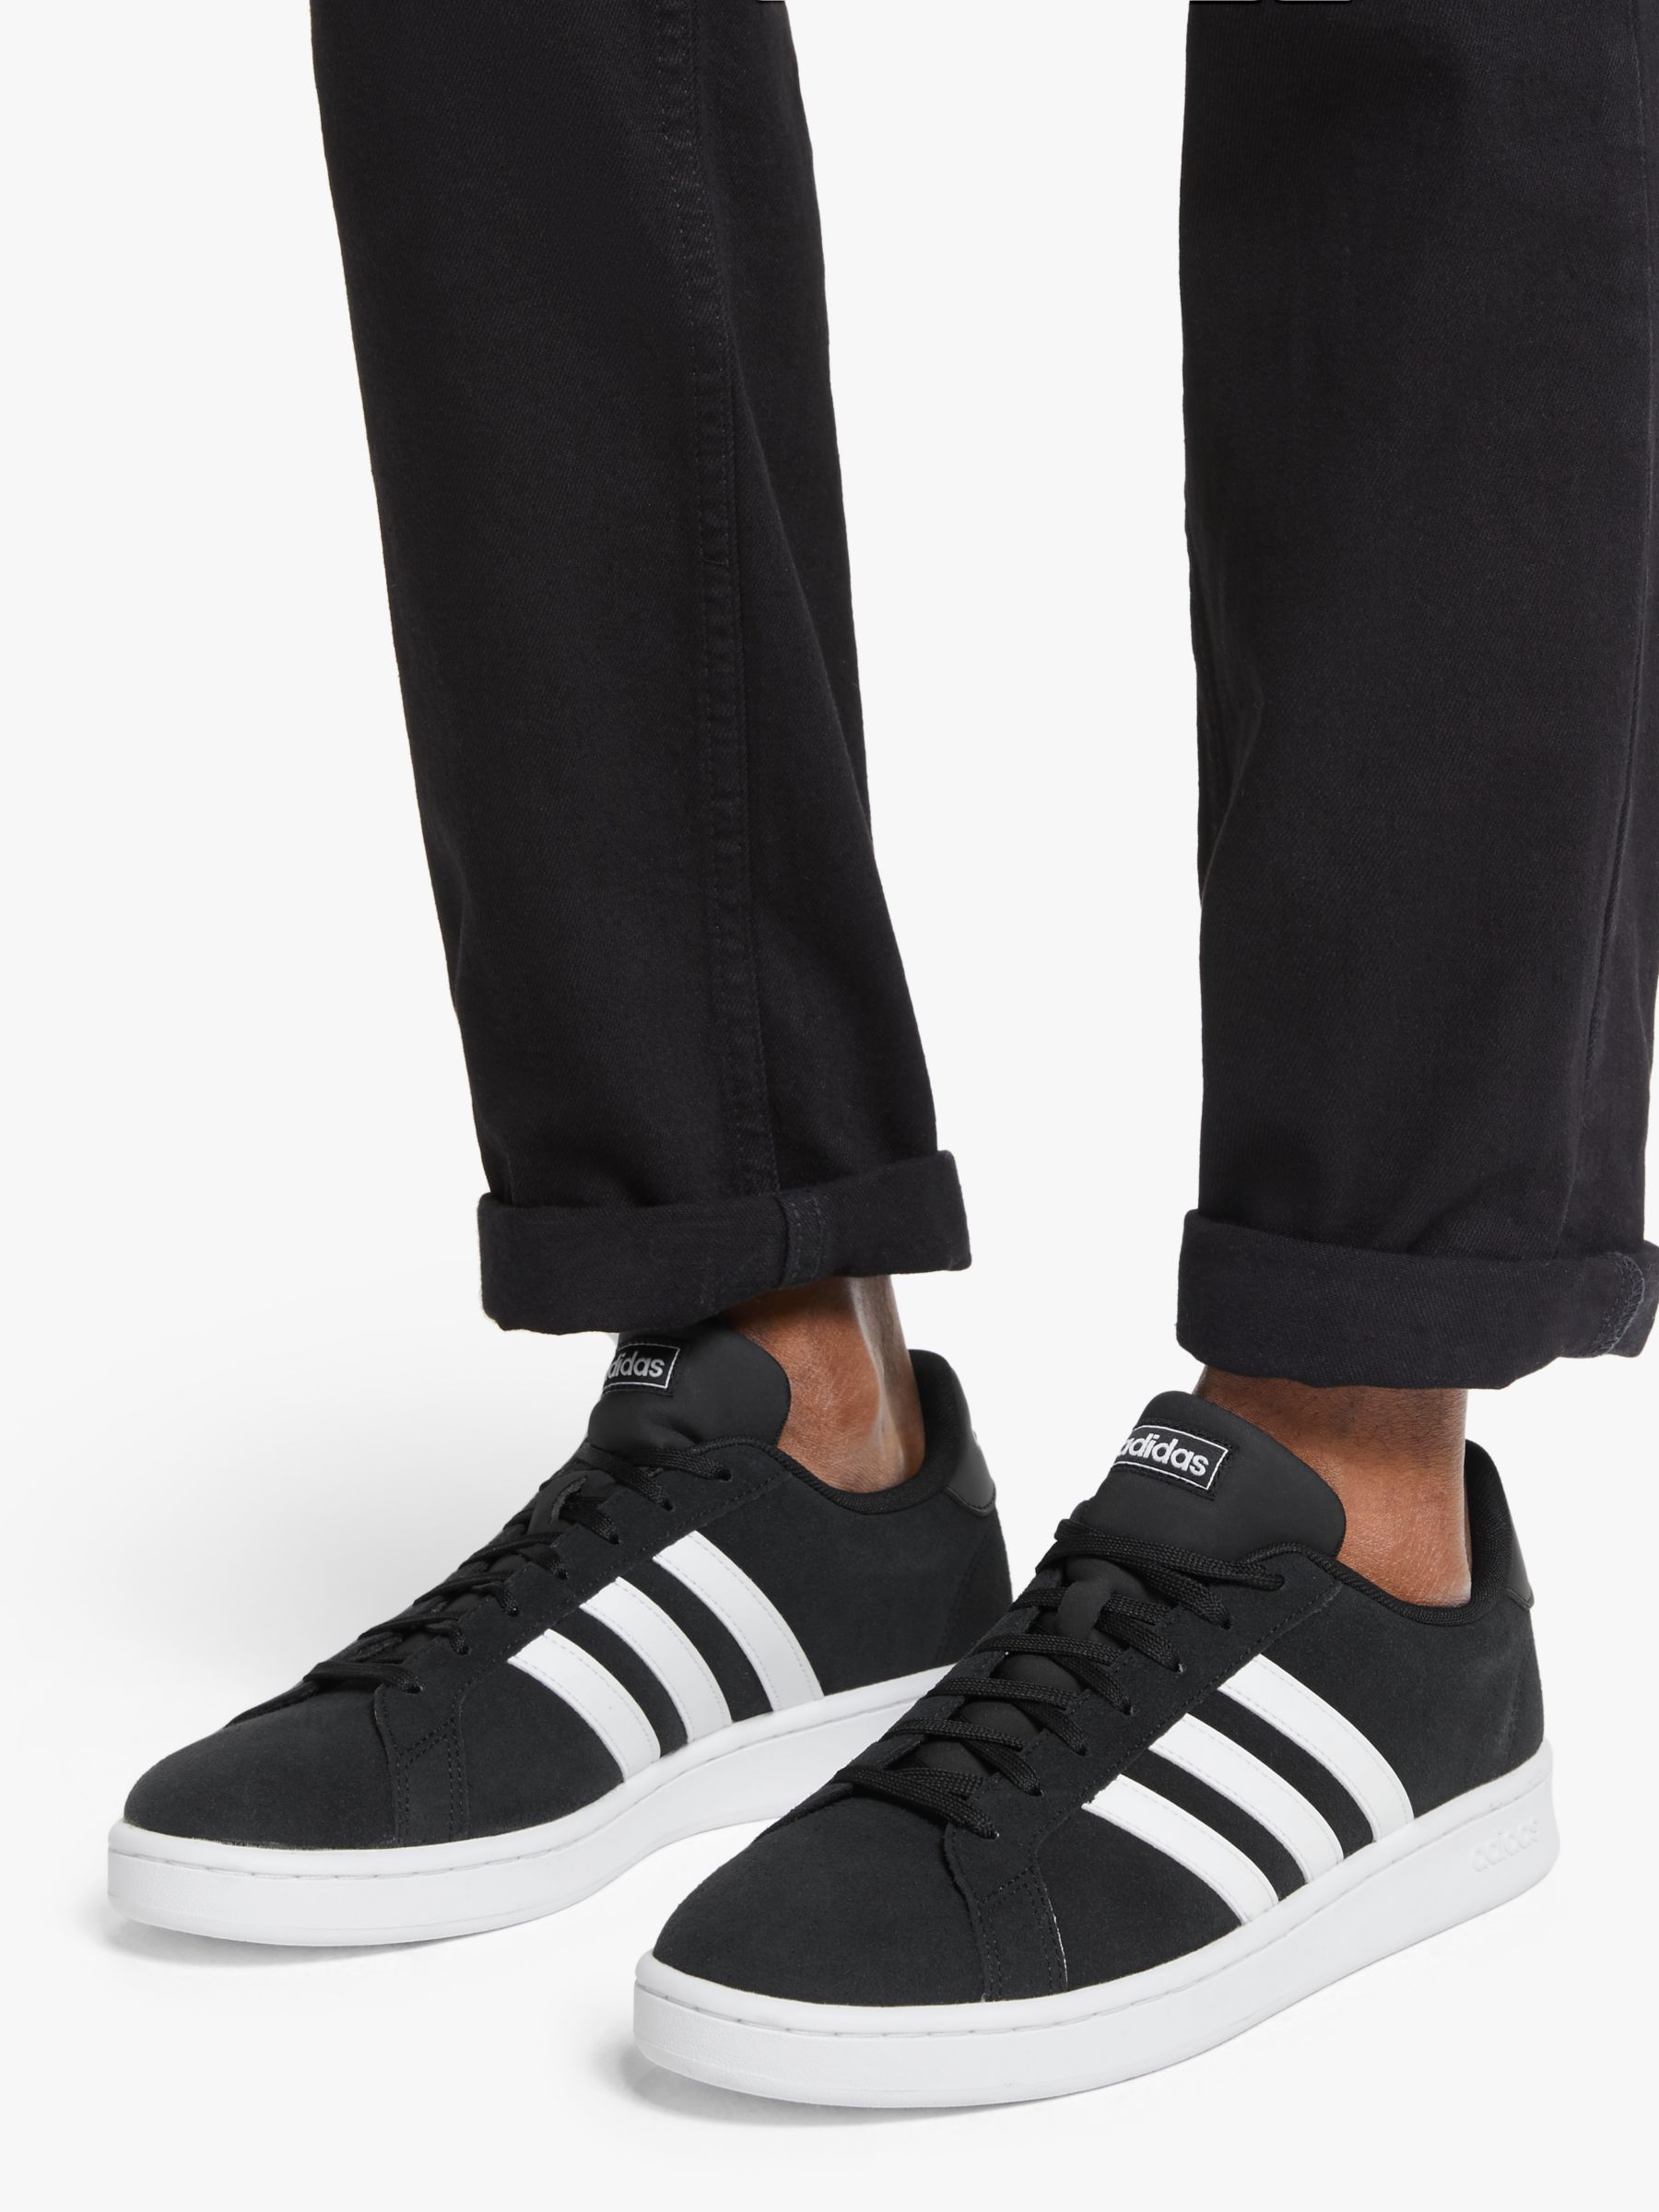 adidas grand court men's suede sneakers